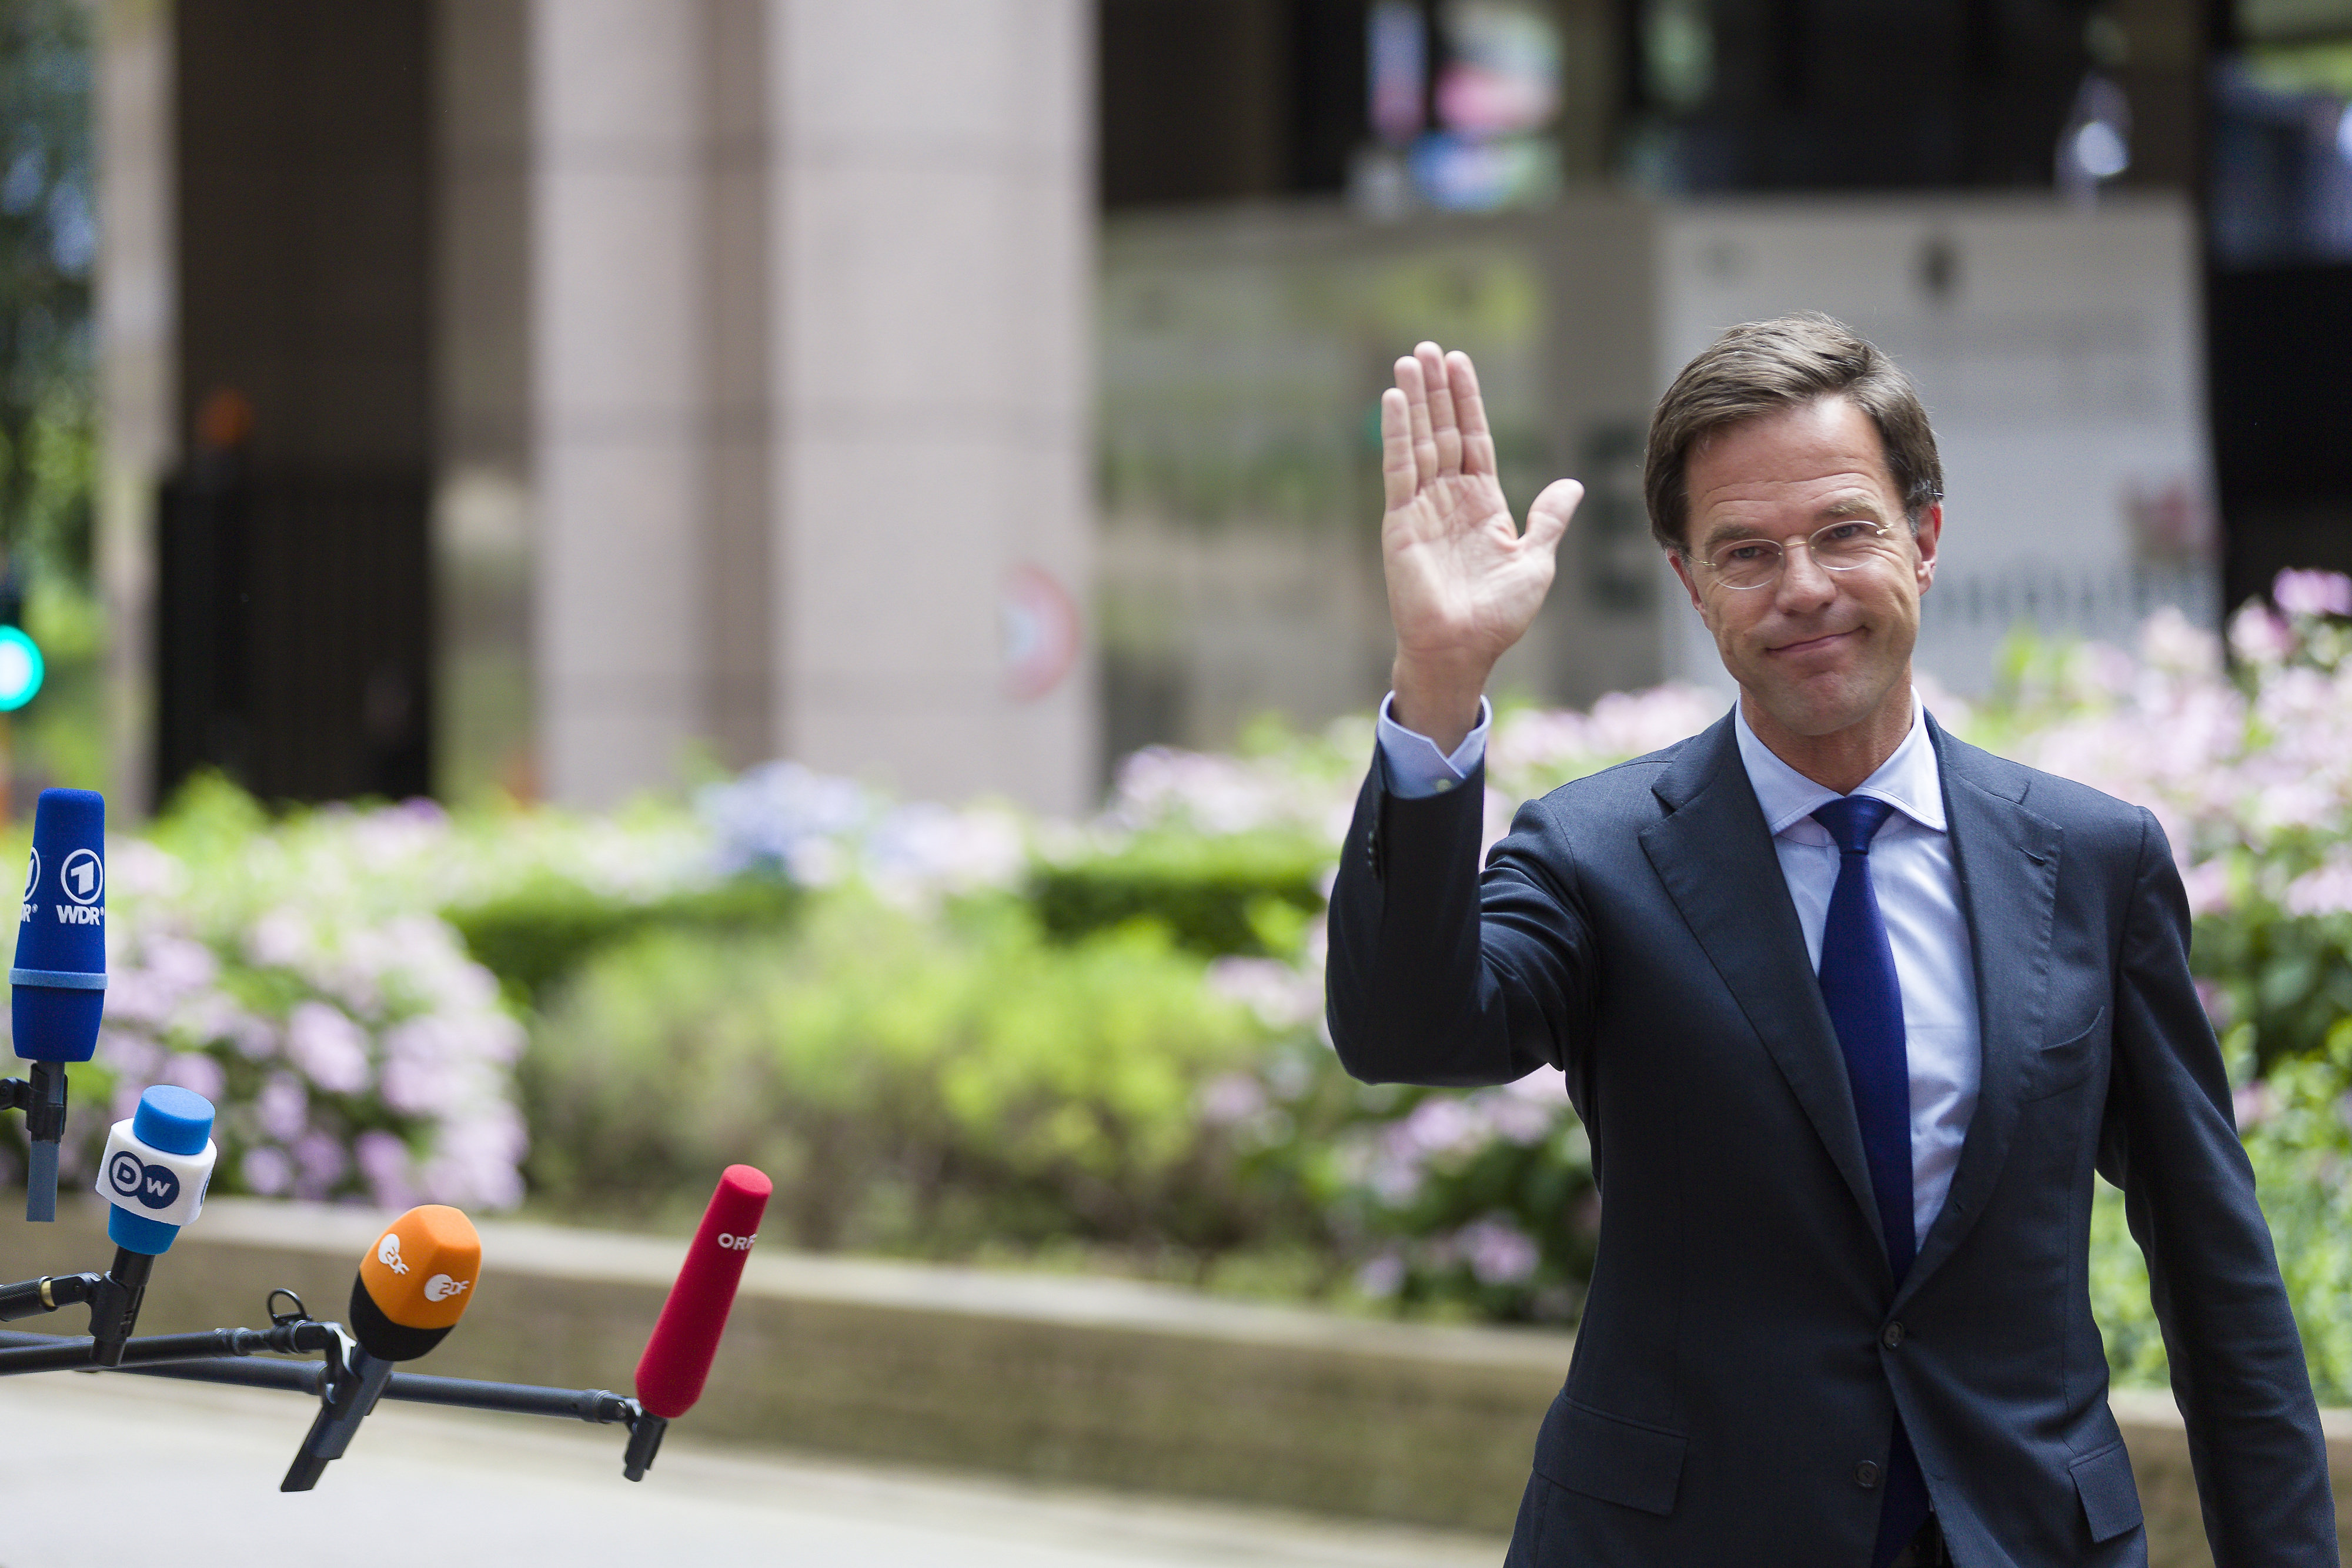 Dutch prime minister Mark Rutte arrives in Brussels. Photo: Thierry Monasse/Polaris /HH